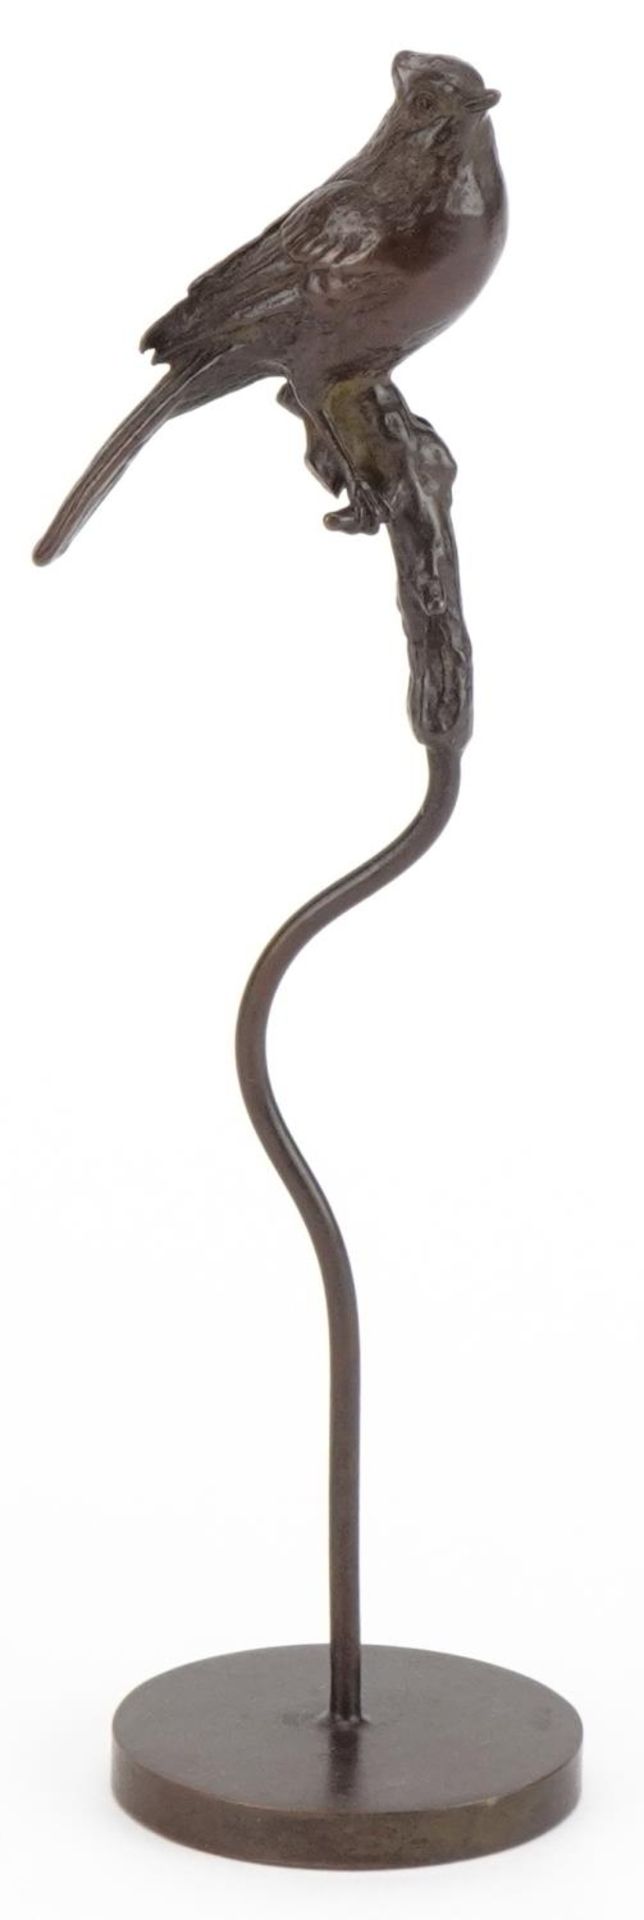 Patinated bronze sculpture of a bird perched on a branch, 17cm high : For further information on